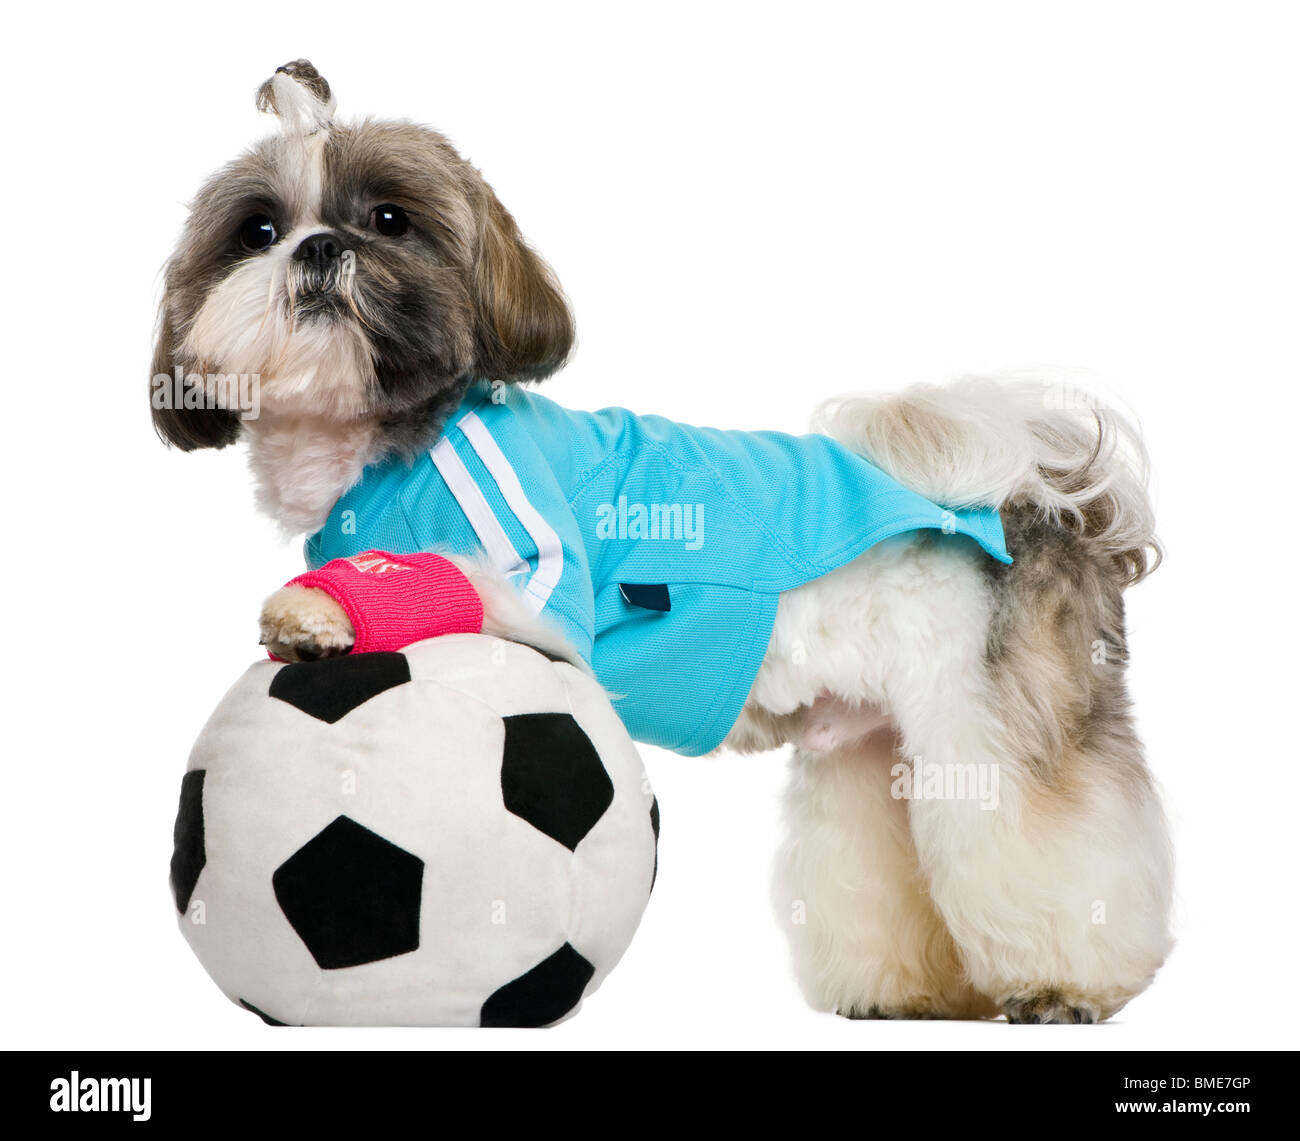 Shih Tzu, 18 months old, dressed with soccer ball, in front of white background Stock Photo